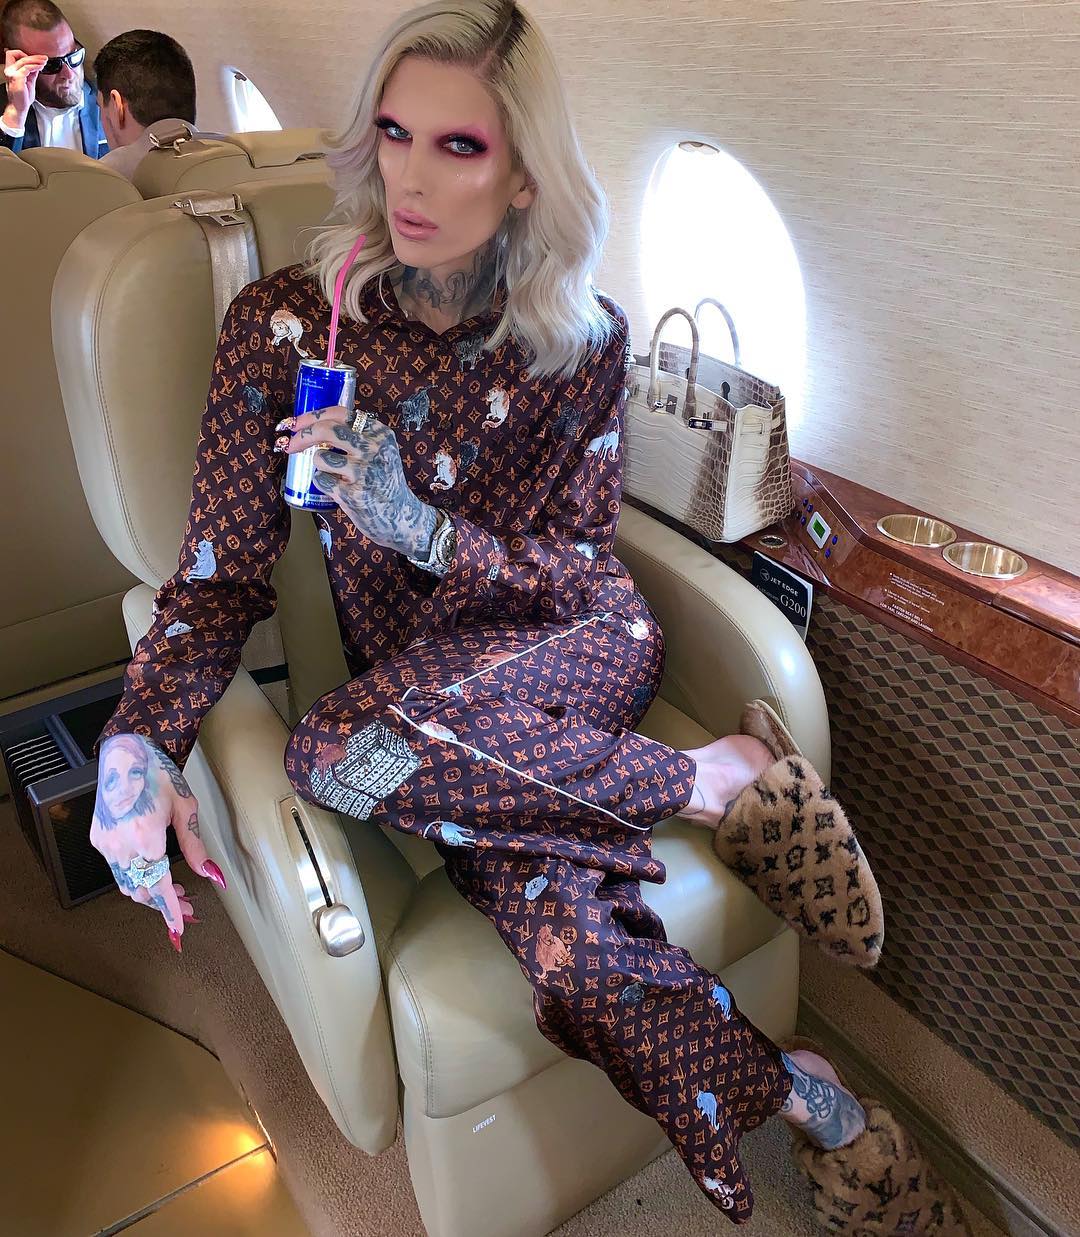 Jeffree Lynn star going to Walmart in his gucci tracksuit